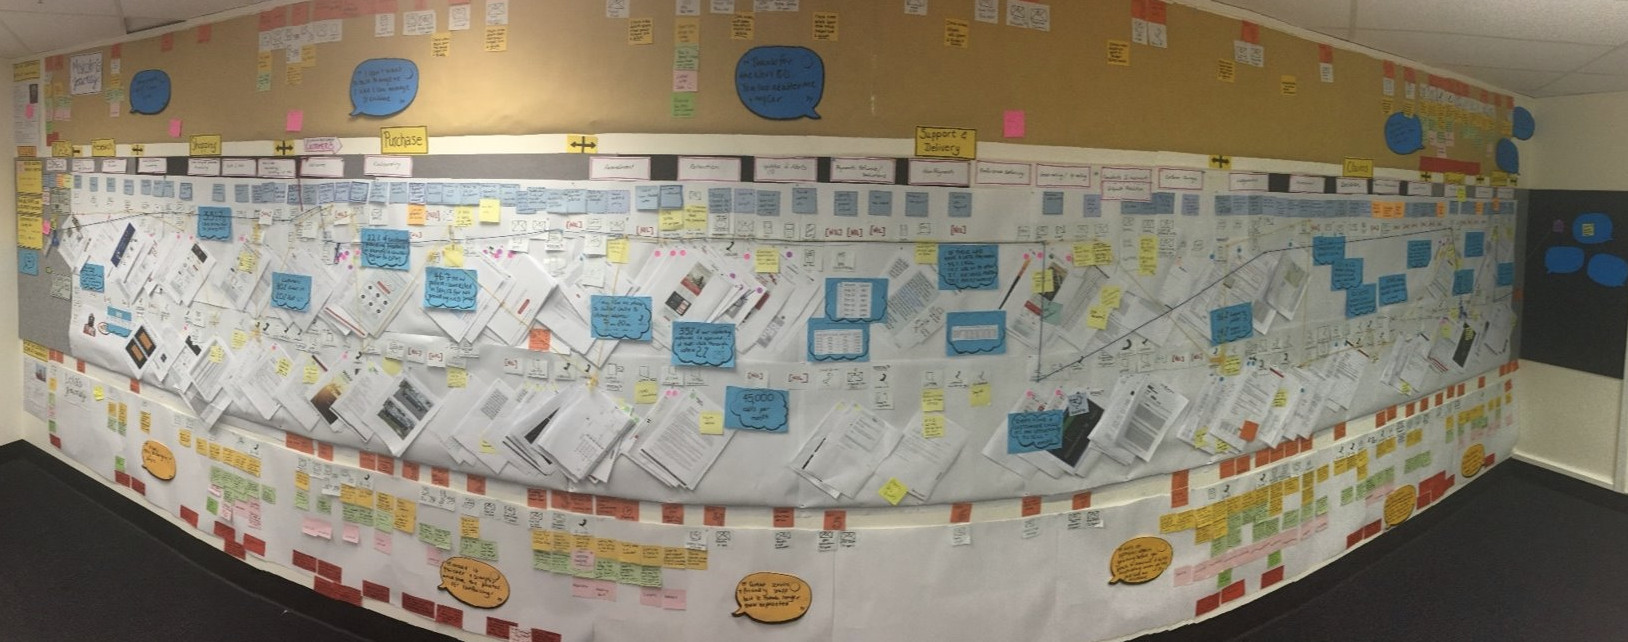 Customer journey mapping example for finance business